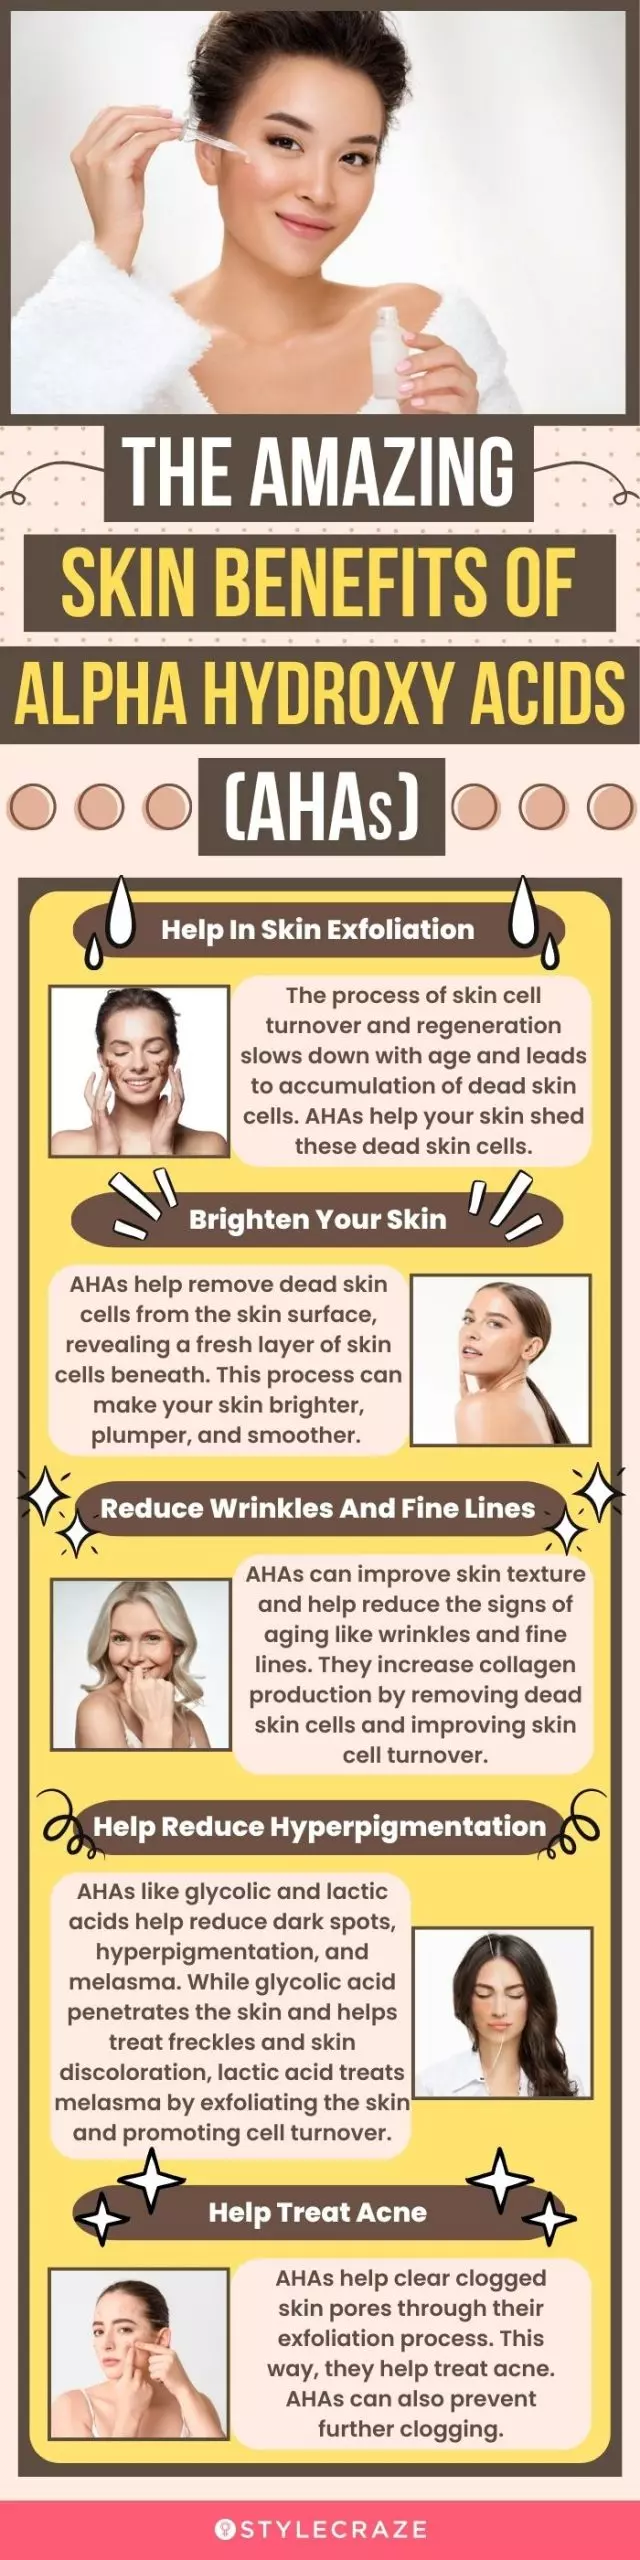 the amazing skin benefits of alpha hydroxy acids (ahas) (infographic)